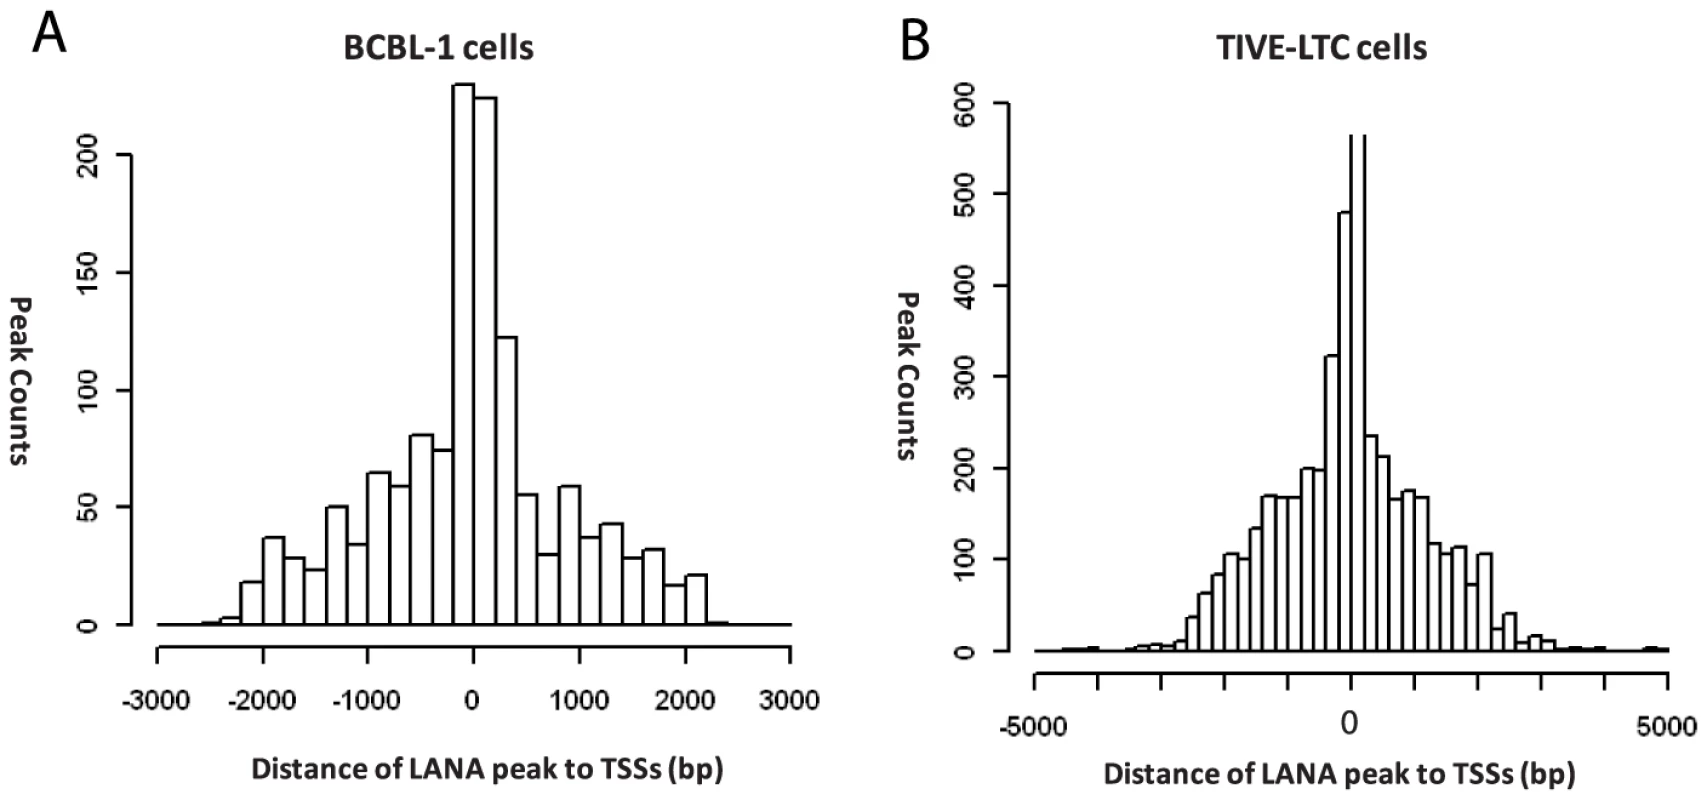 Positions of LANA peaks to the transcription start sites of known genes in BCBL-1 and TIVE-LTC cells.